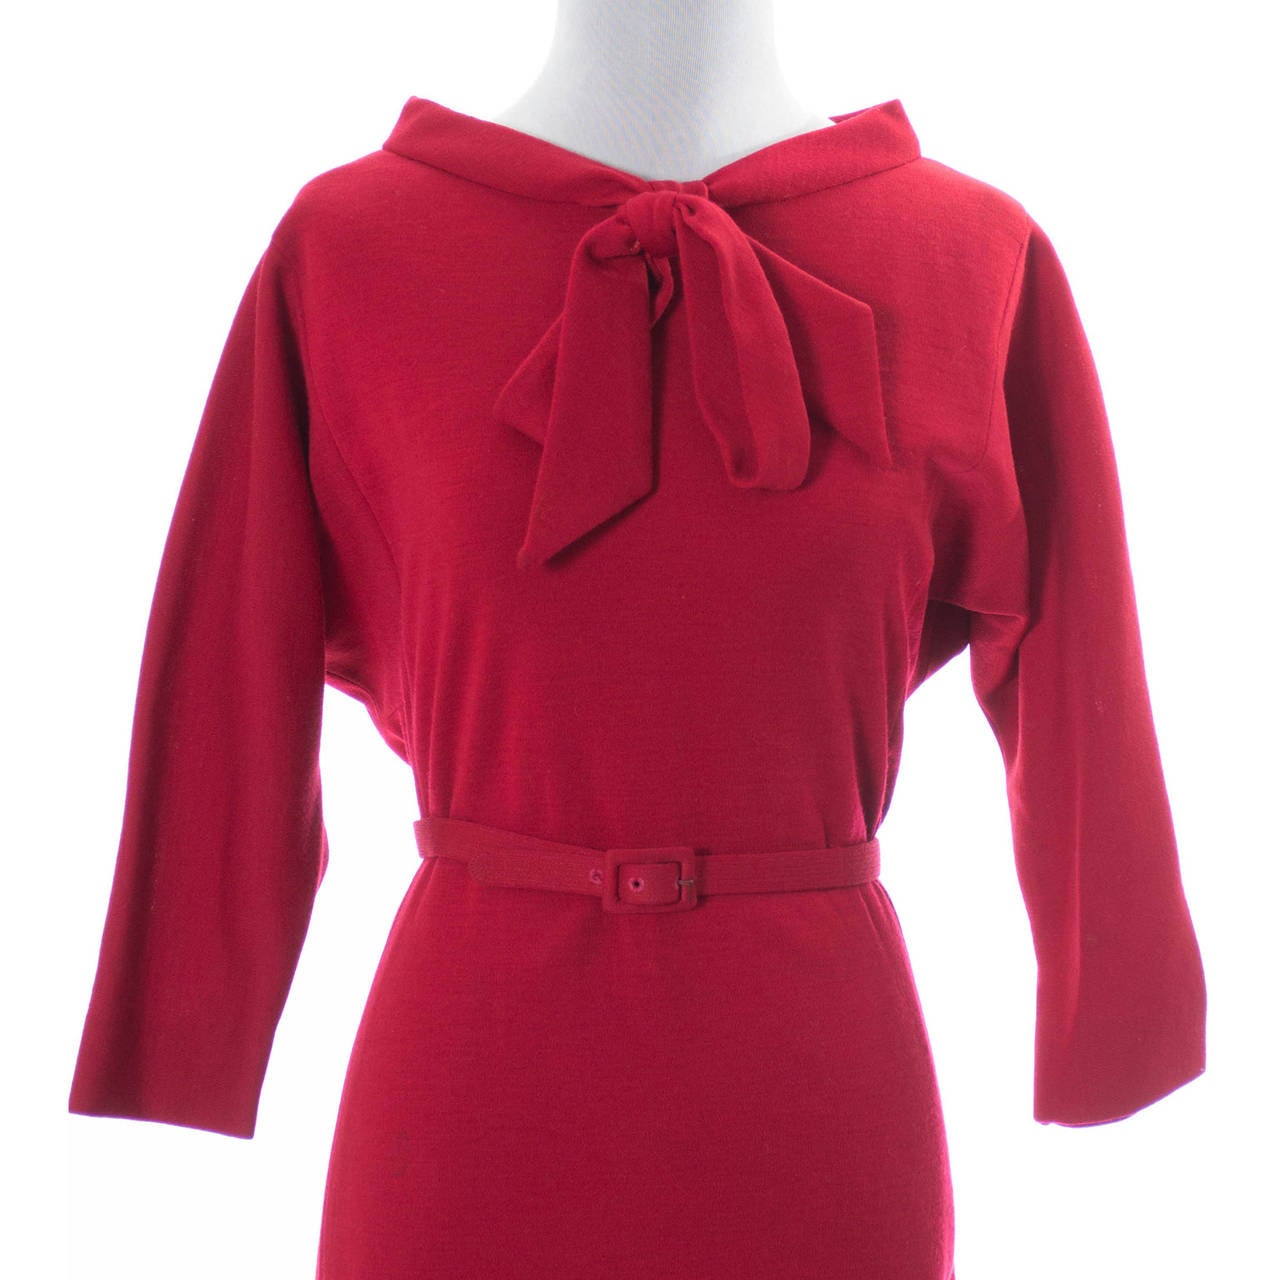 Norman Norell vintage Red Wool Day Dress Bow Belt 1